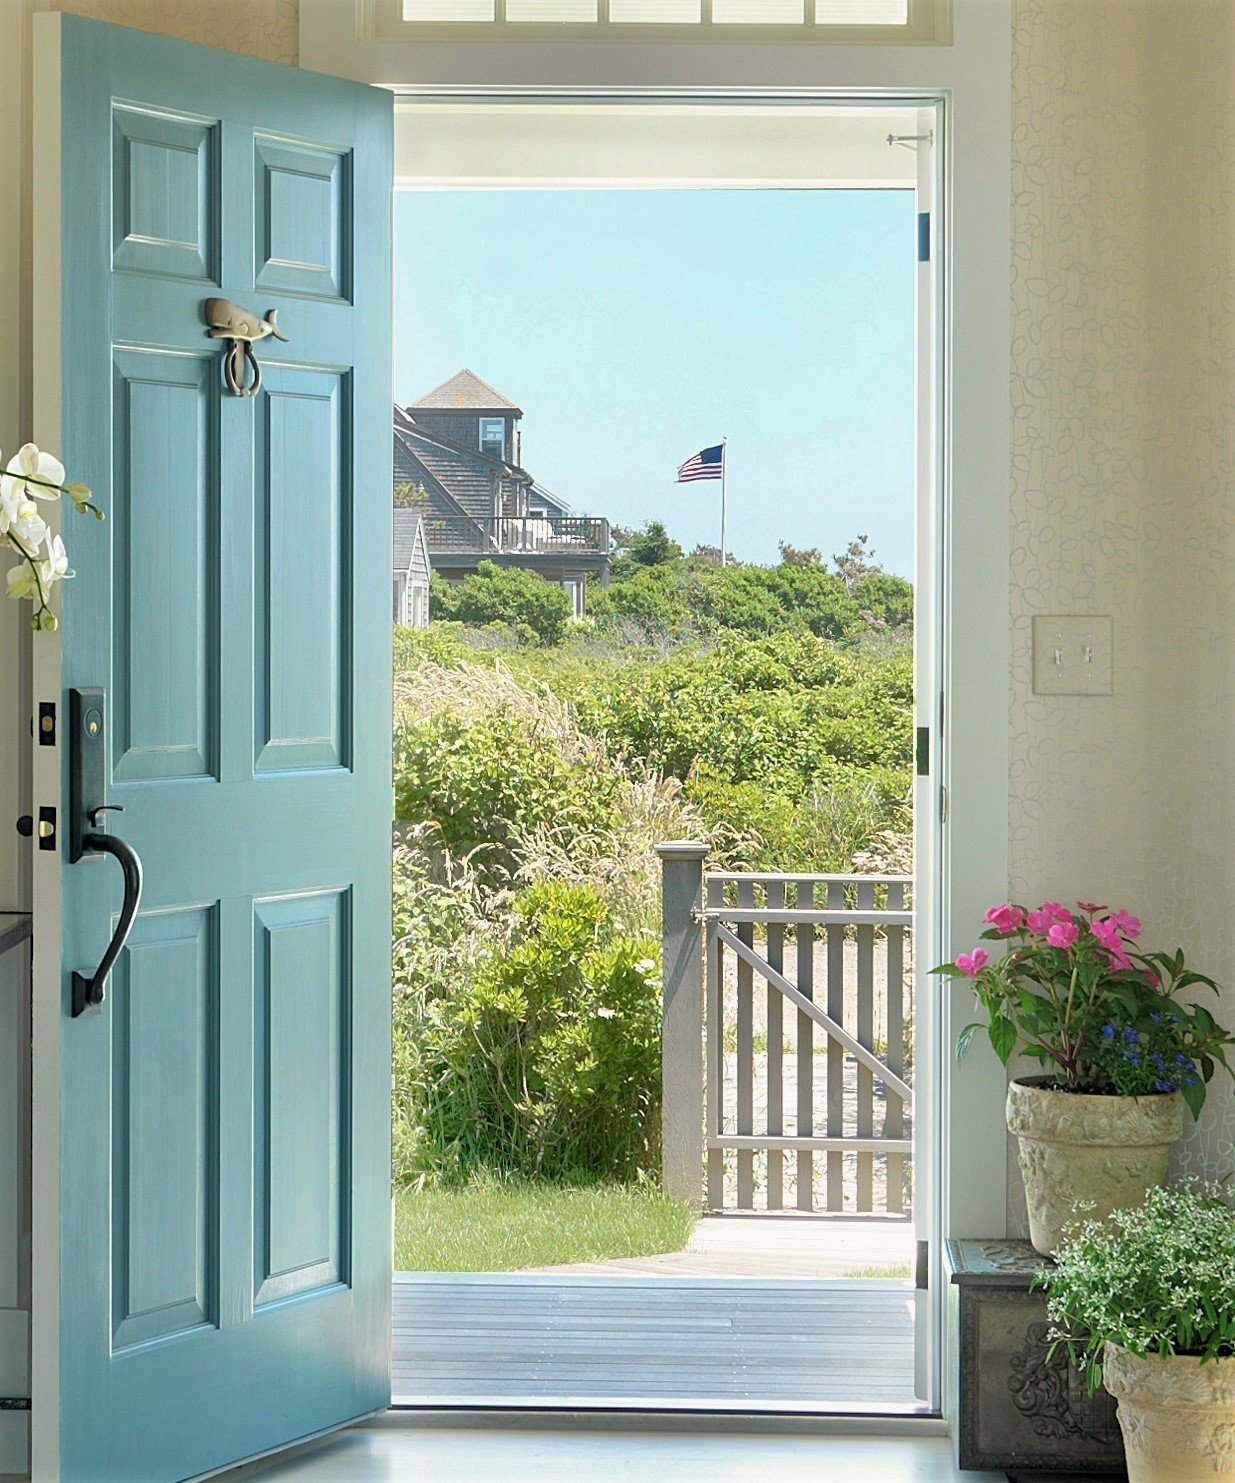 Newport Blue: Surrounded by the deep blue Atlantic and boundless blue summer skies, this saturated hue gives presence to the natural elements abound.